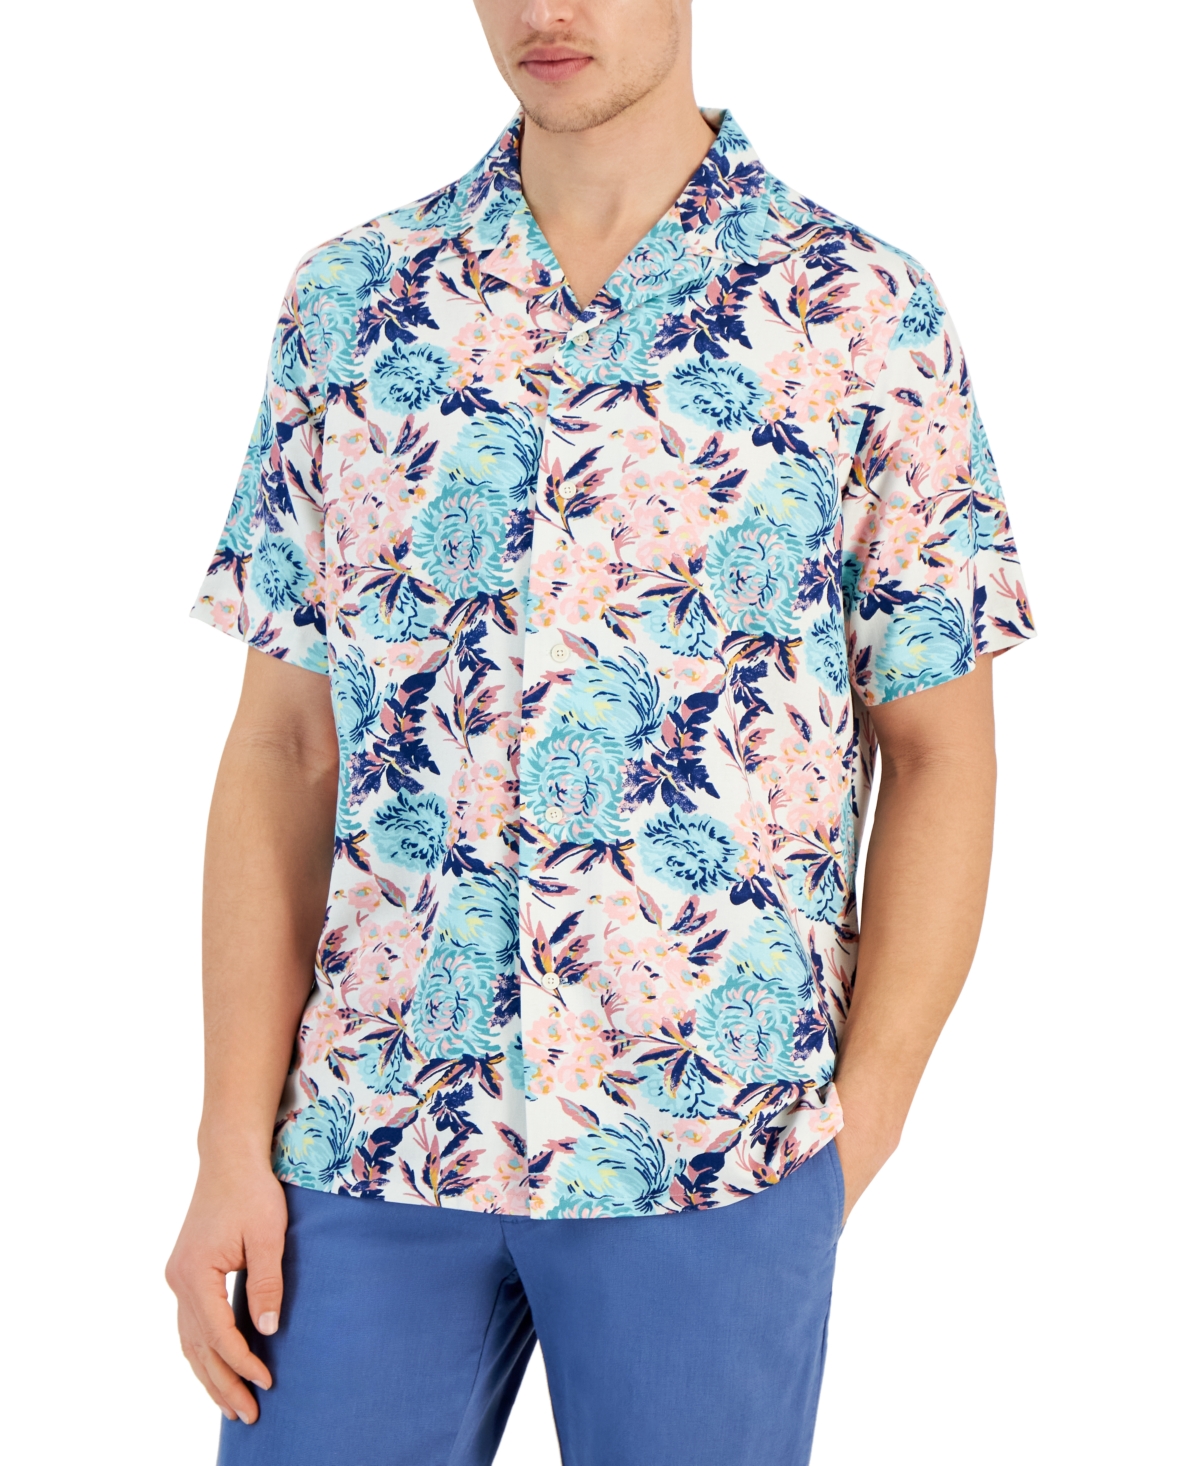 Men's Regular-Fit Floral-Print Button-Down Camp Shirt, Created for Macy's - Bright White